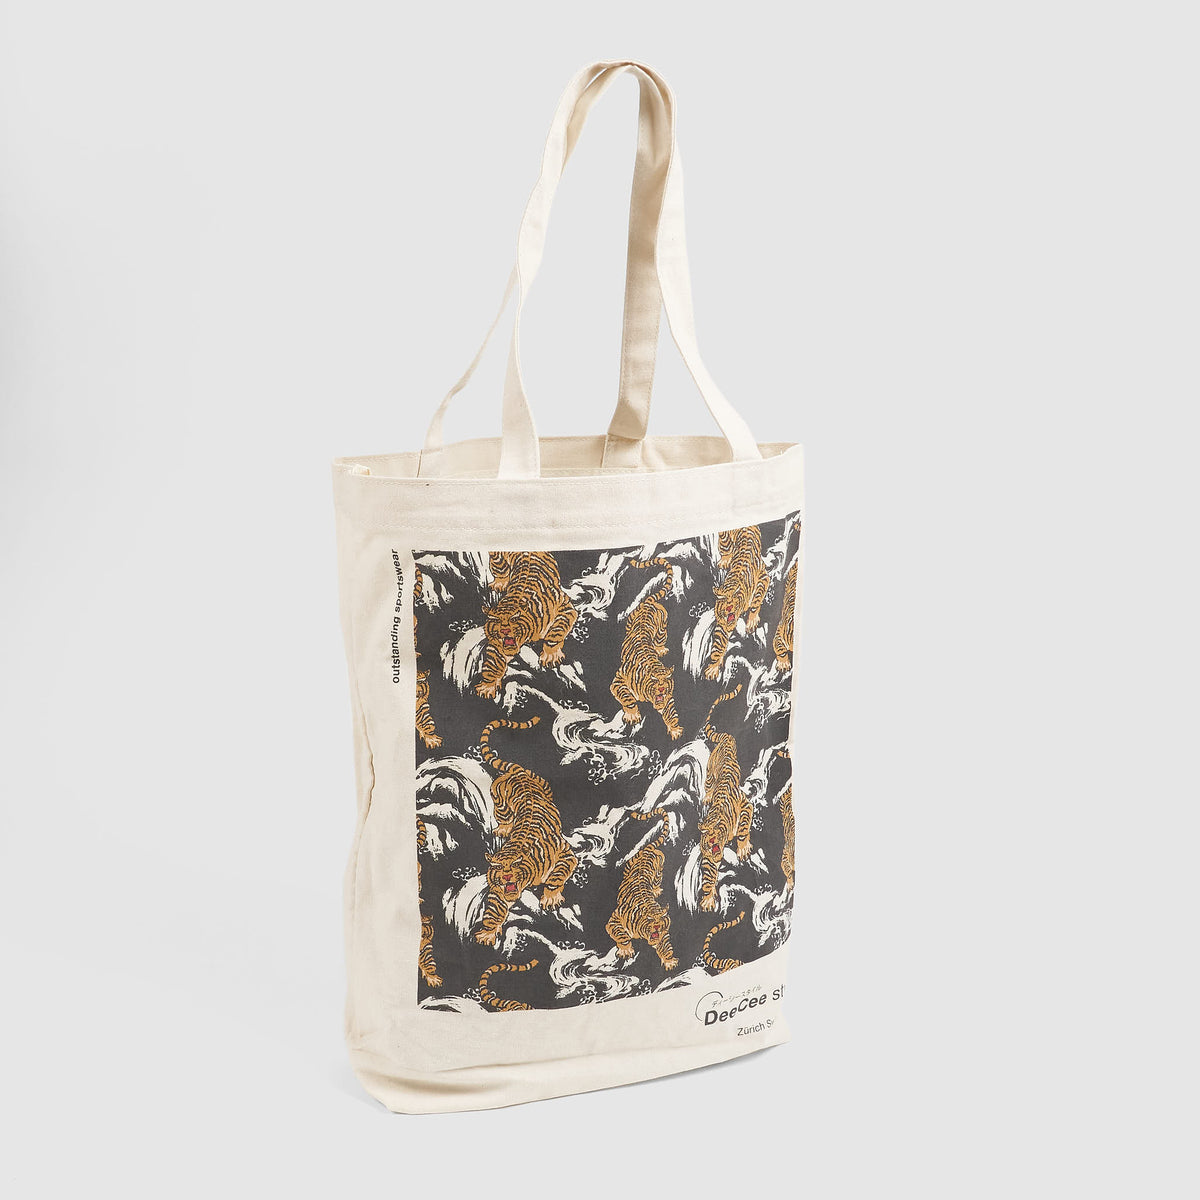 DeeCee Style Tiger Cotton Tote Bag